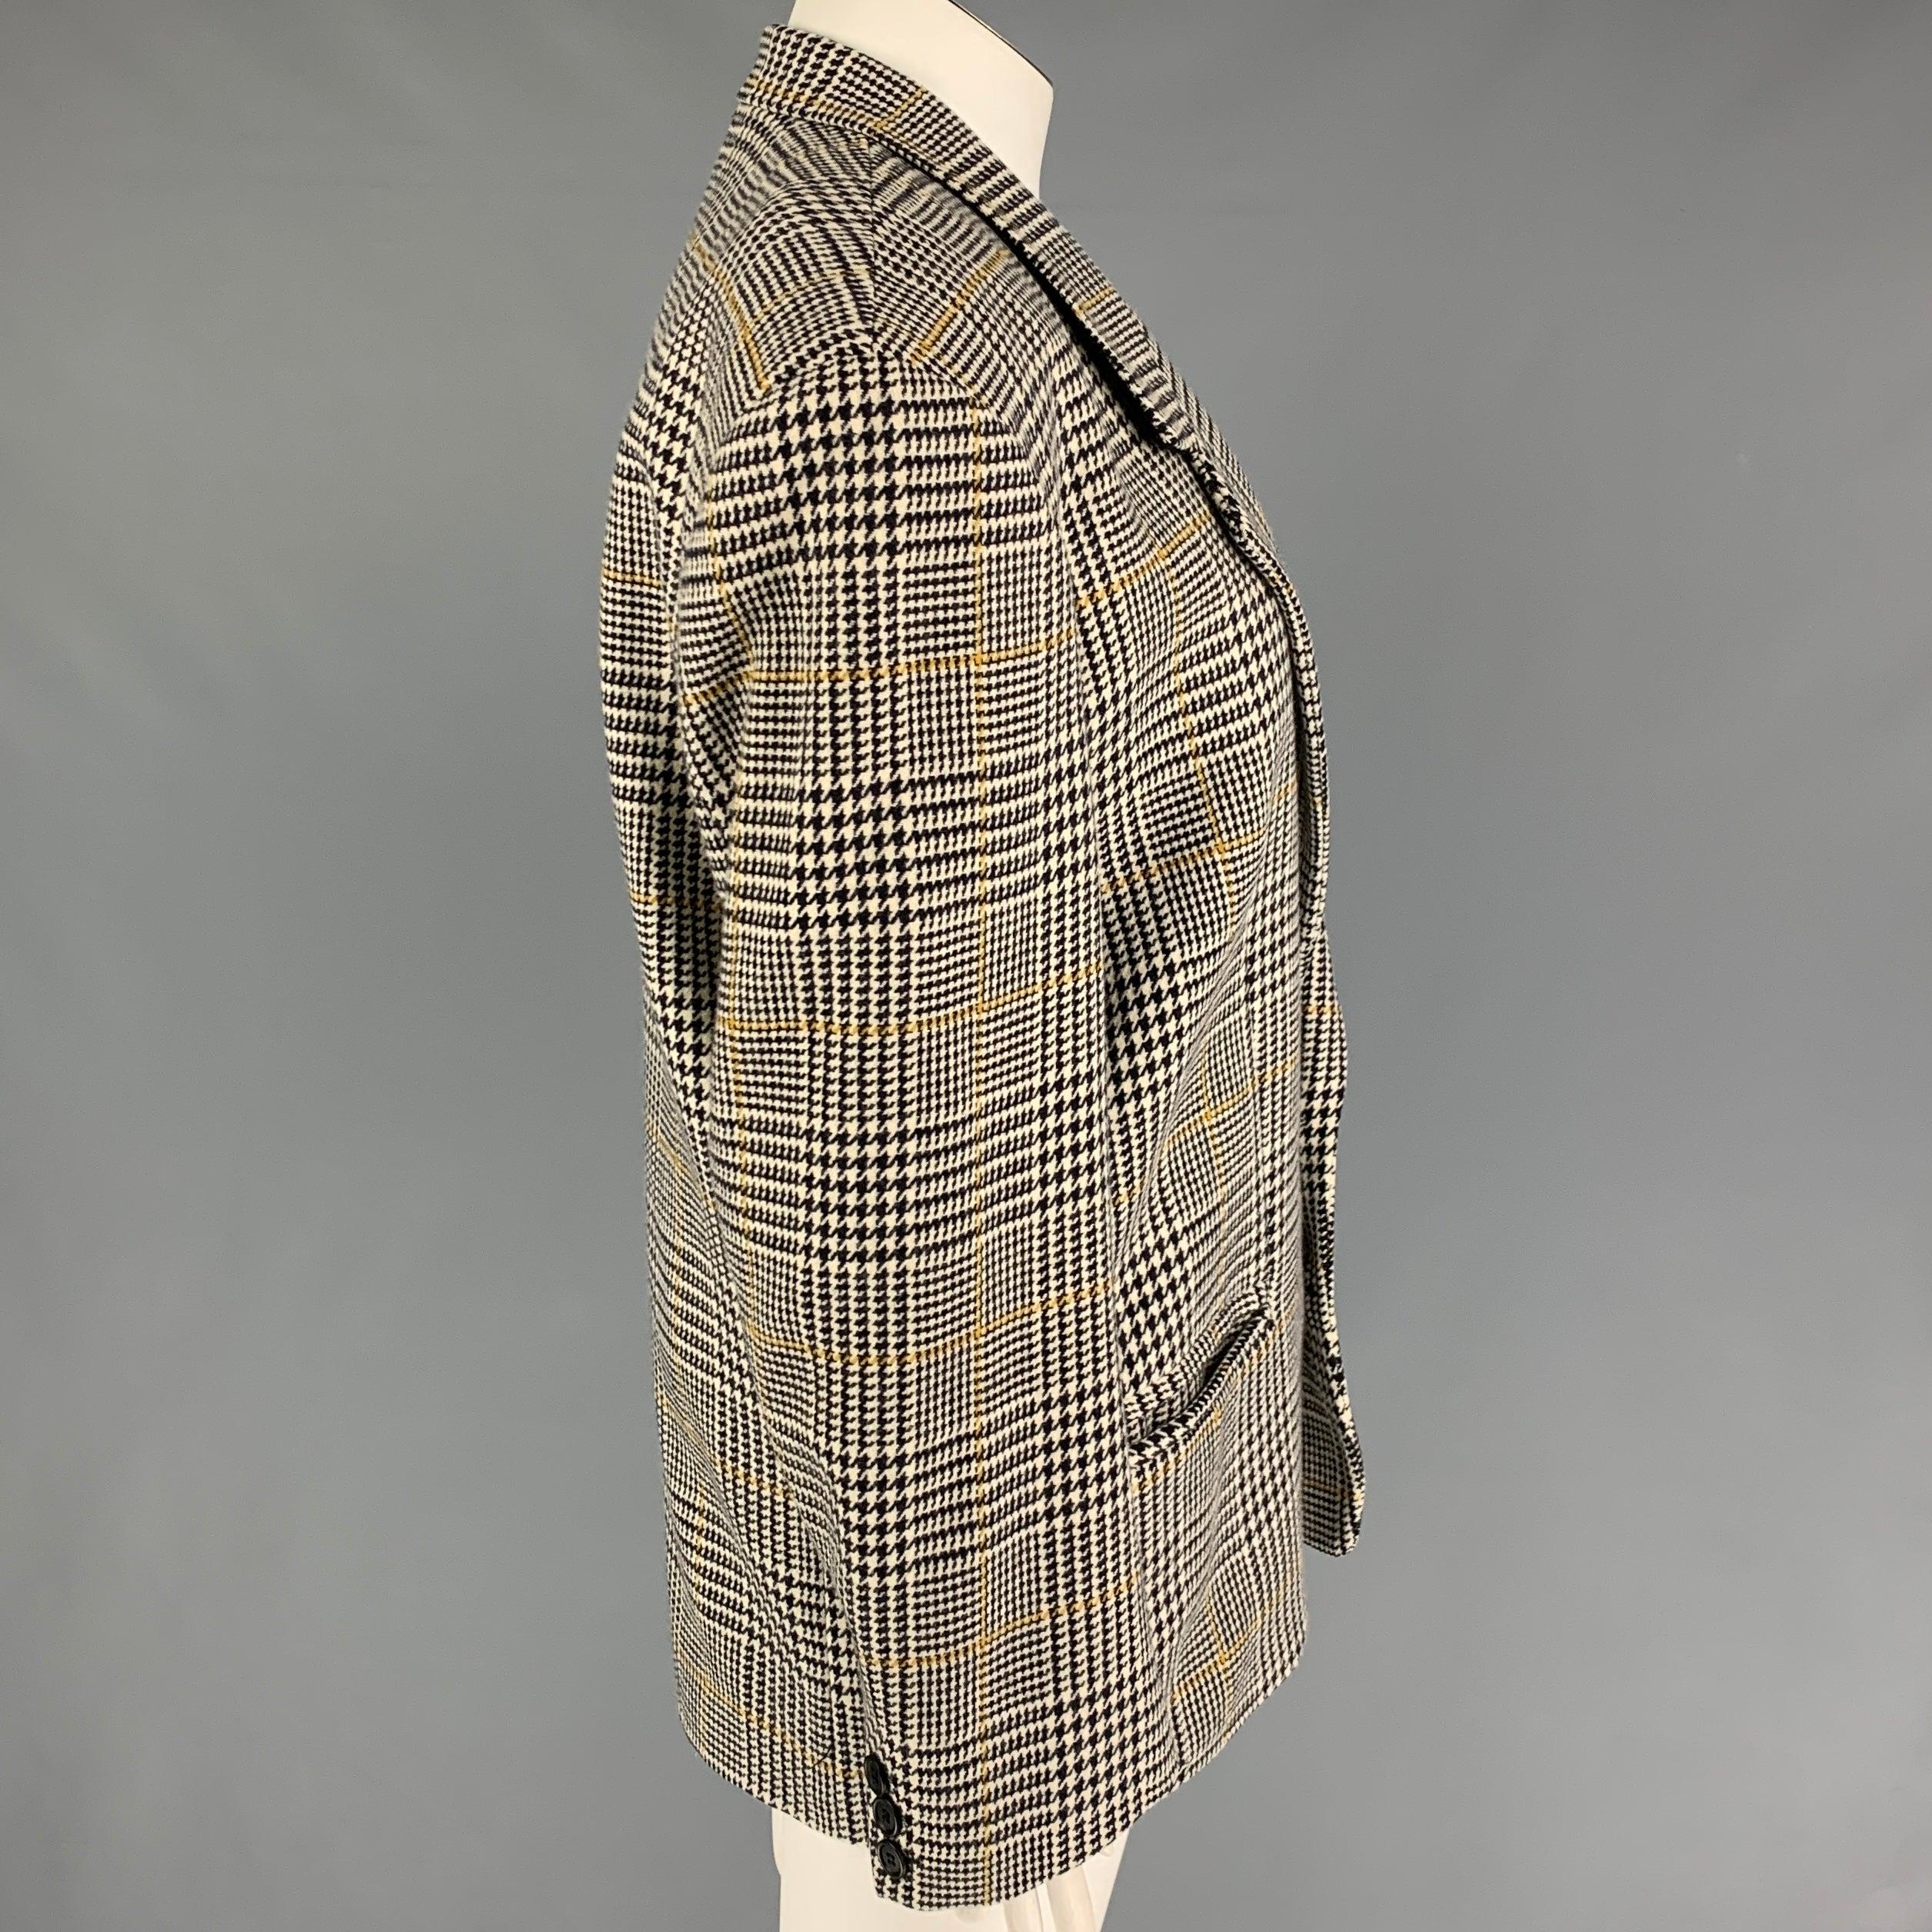 BYBLOS blazer comes in a black & white houndstooth viscose with a full liner featuring a notch lapel, slit pockets, and a double button closure. Made in Italy.
Very Good
Pre-Owned Condition. 

Marked:   I 50 / F 48 / D 44 / GB 42 / BS 46 / USA 16